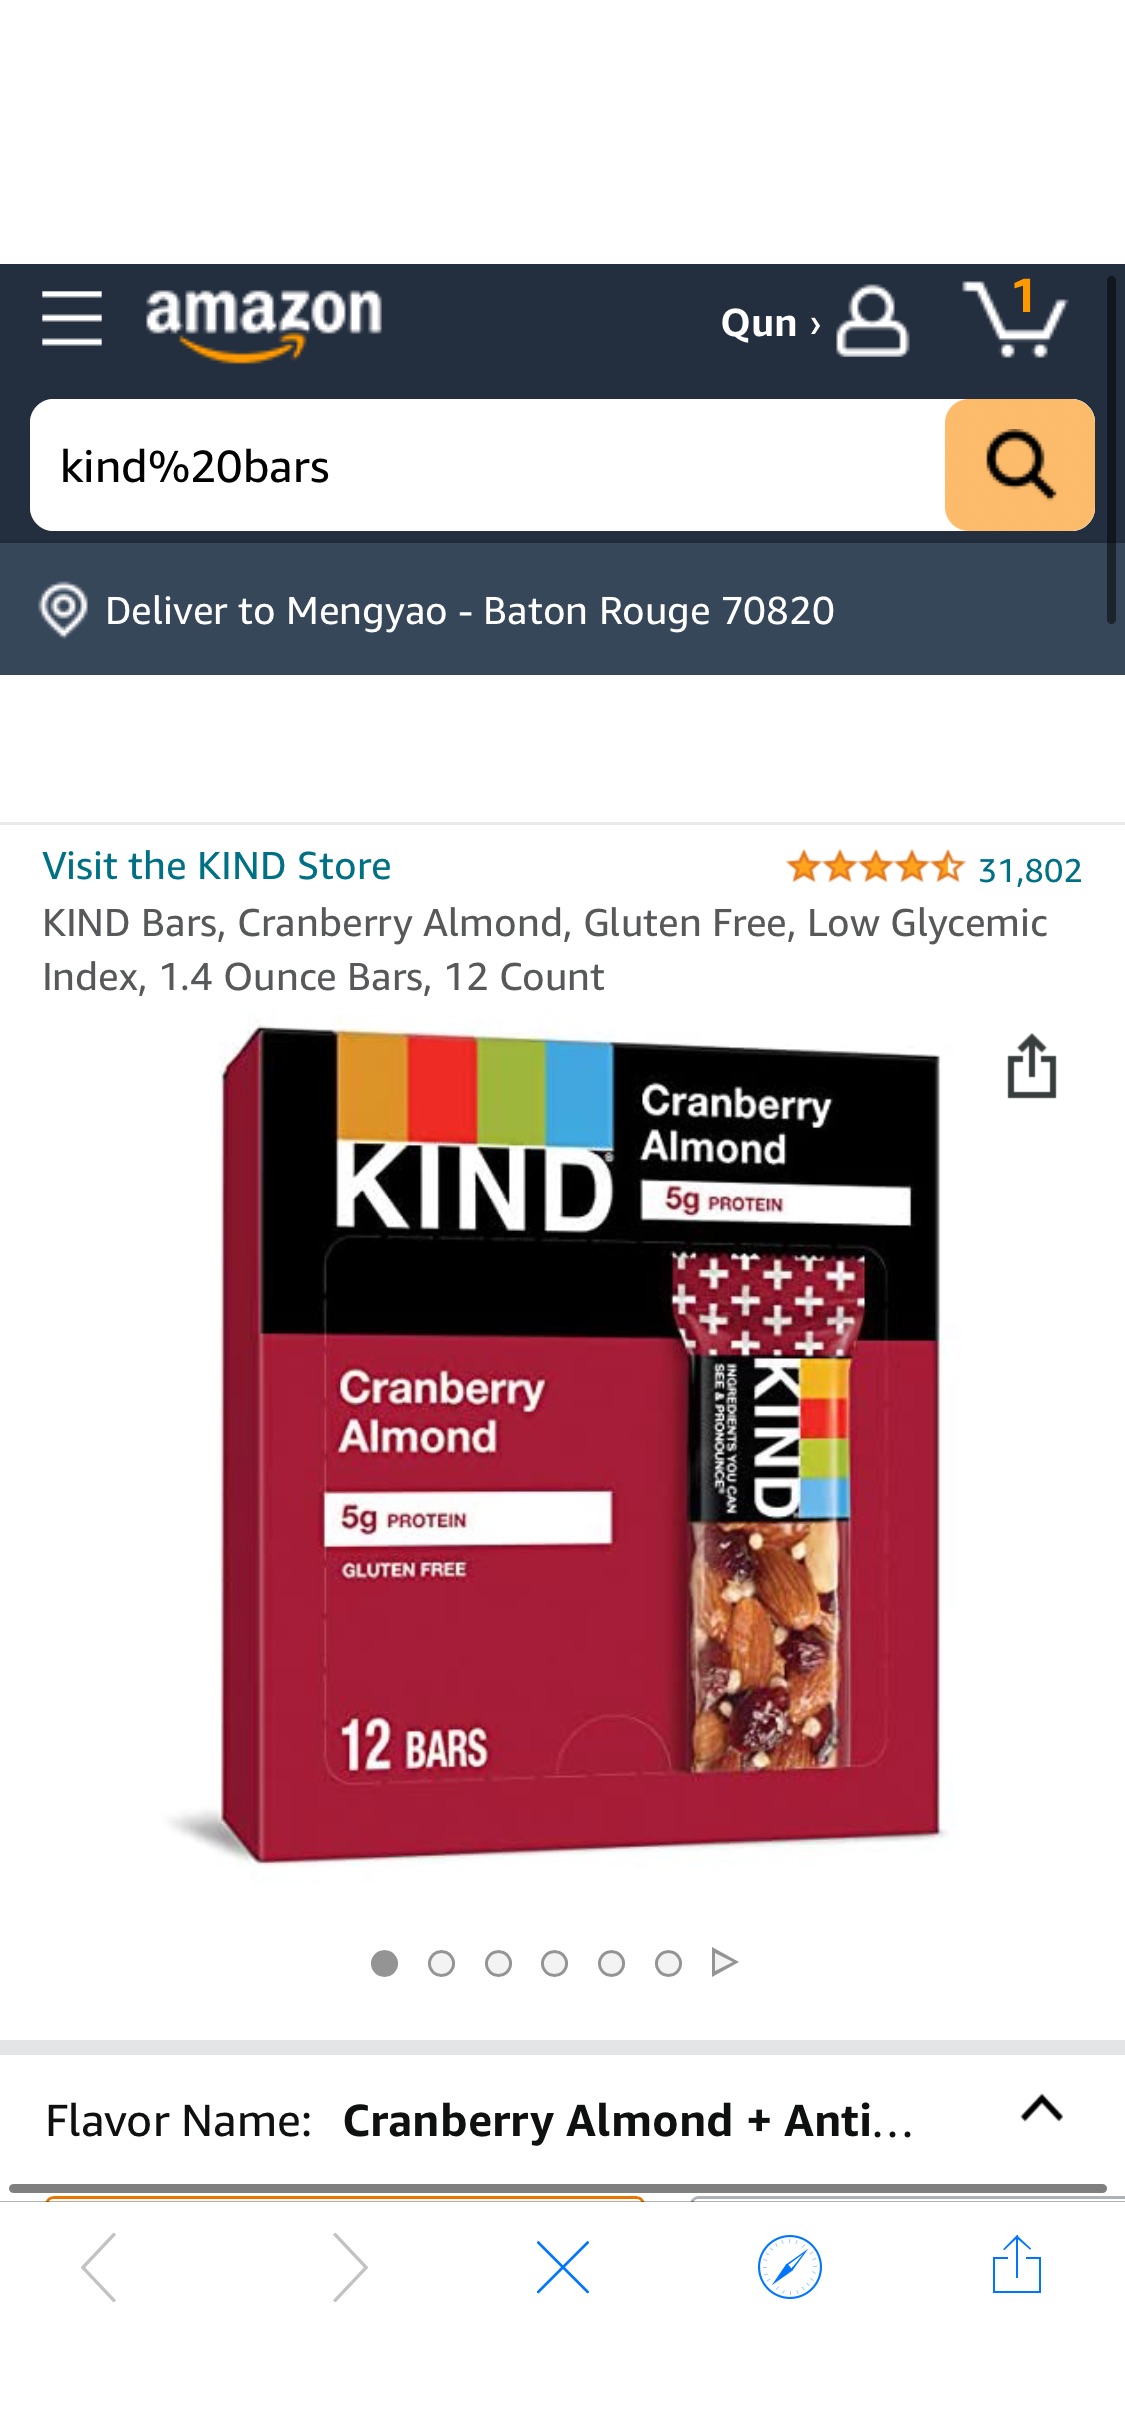 Amazon.com: KIND Bars, Cranberry Almond, Gluten Free, Low Glycemic Index, 1.4 Ounce Bars, 12 Count : Grocery & Gourmet Food 零食